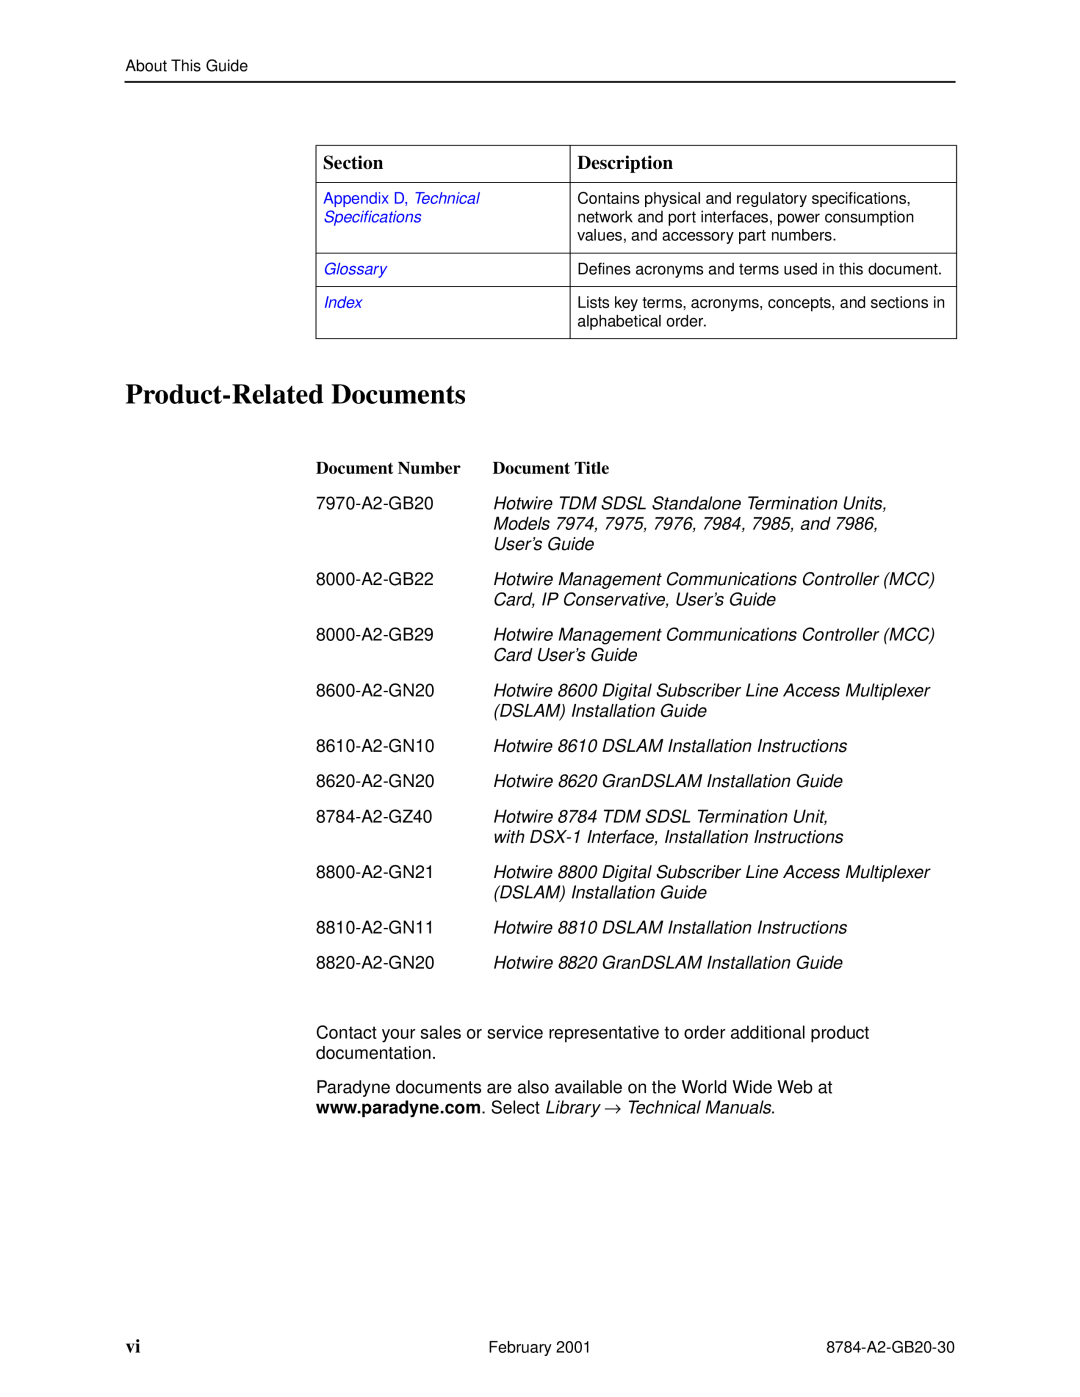 Paradyne 8784 Product-Related Documents, 8610-A2-GN10 Hotwire 8610 DSLAM Installation Instructions, Section, Description 